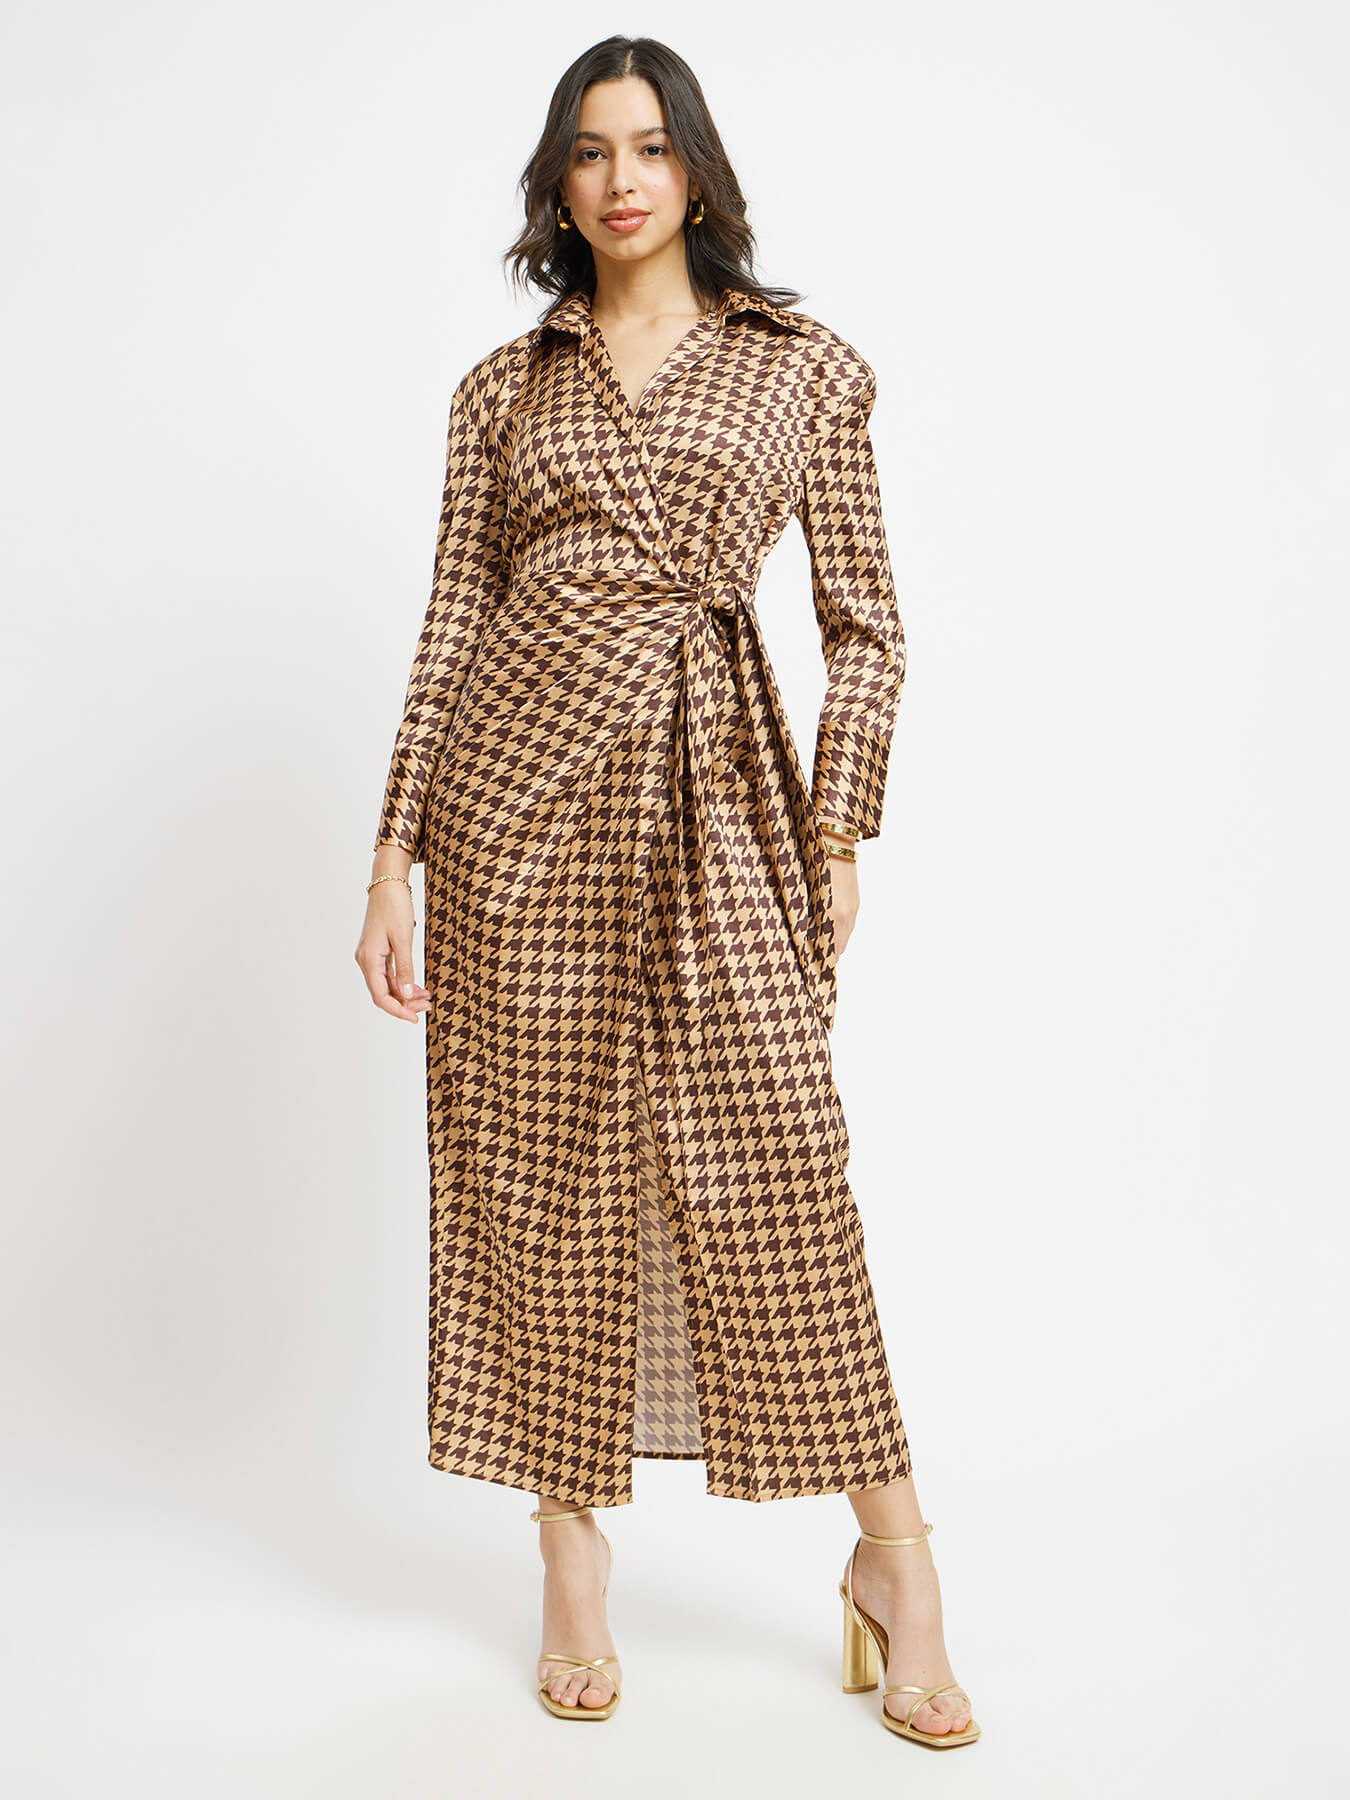 Satin Houndstooth Print Wrap Dress - Brown And Gold